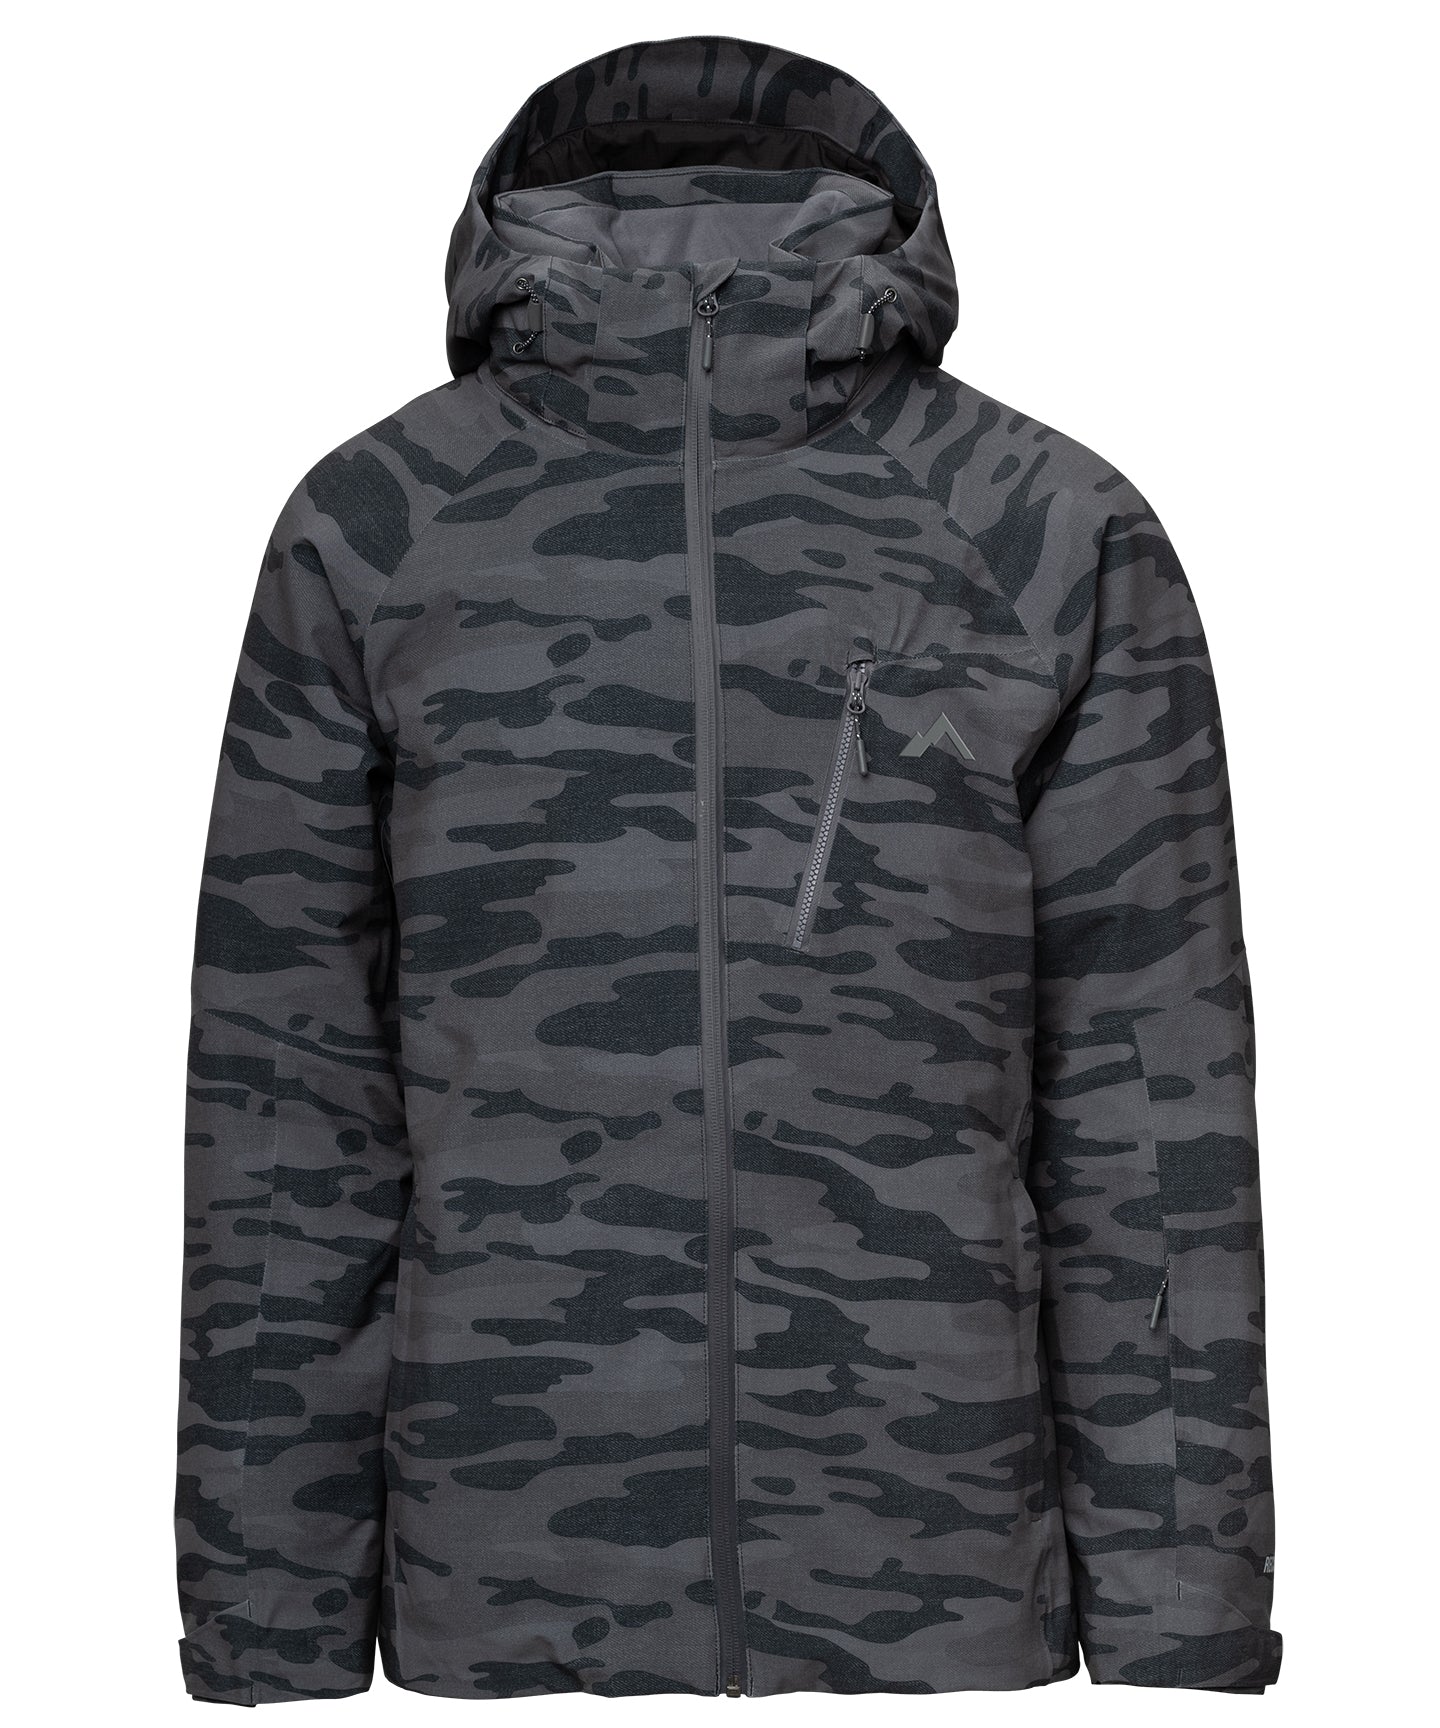 strafe outerwear fall/winter 23/24 collection mens hayden jacket in distressed stealth camo 